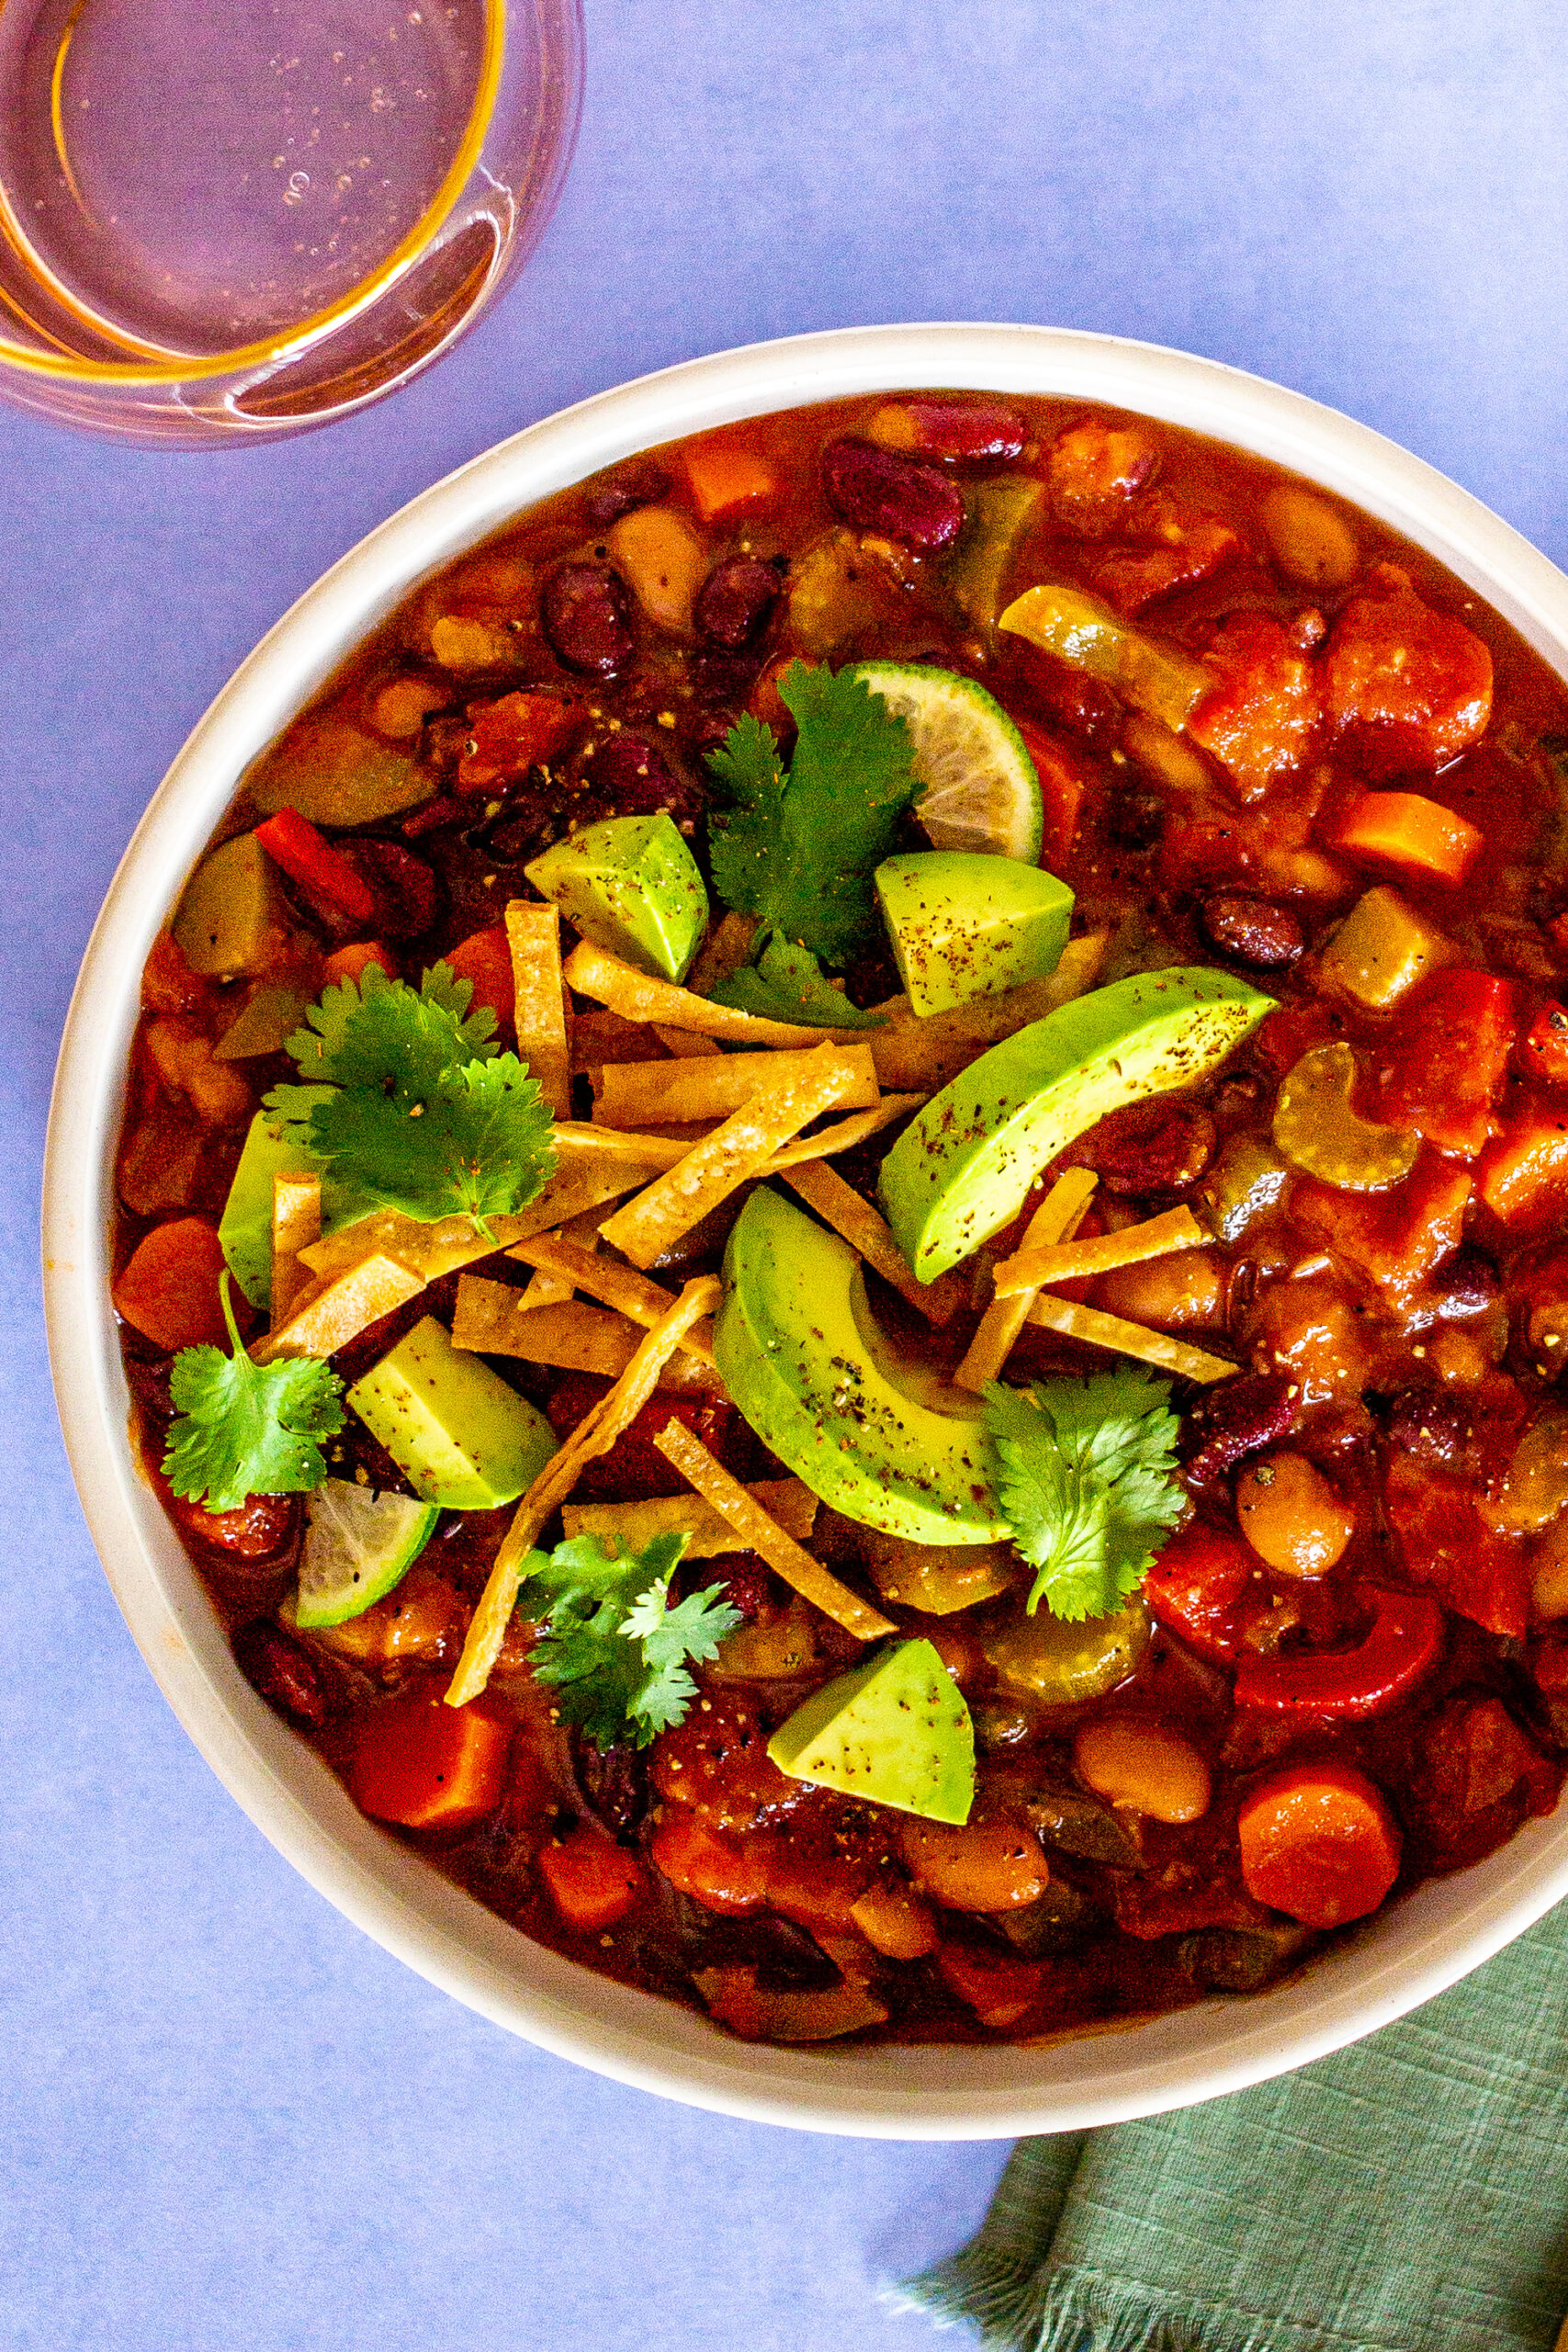 Bowl of chili with slices of avo